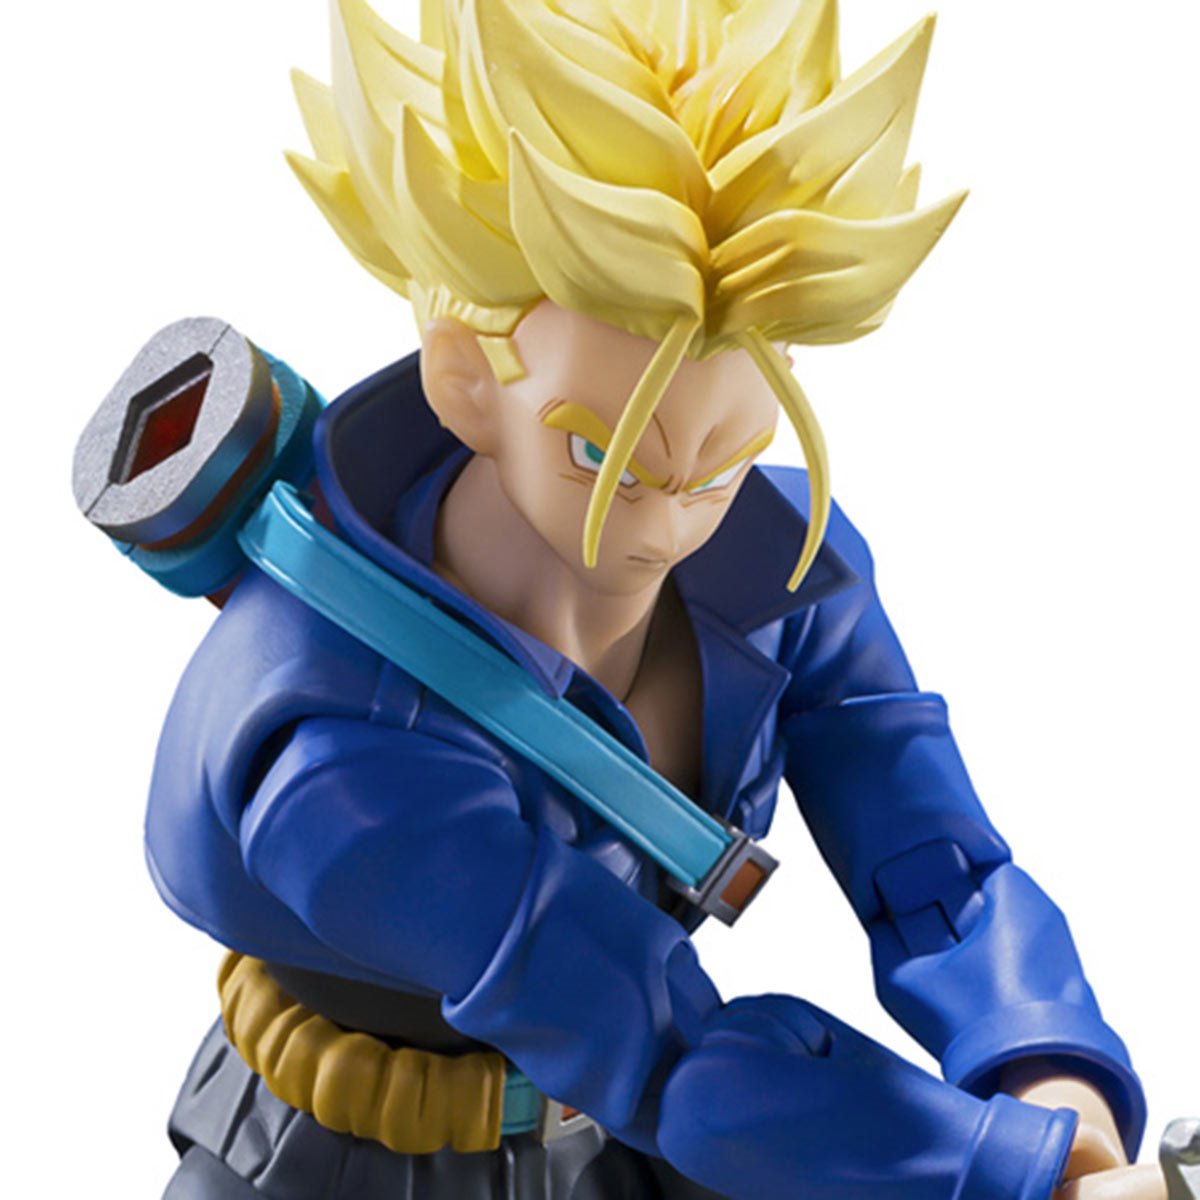 Dragon Ball Z - Super Saiyan Trunks The Boy from the Future Action Figure S.H.Figuarts